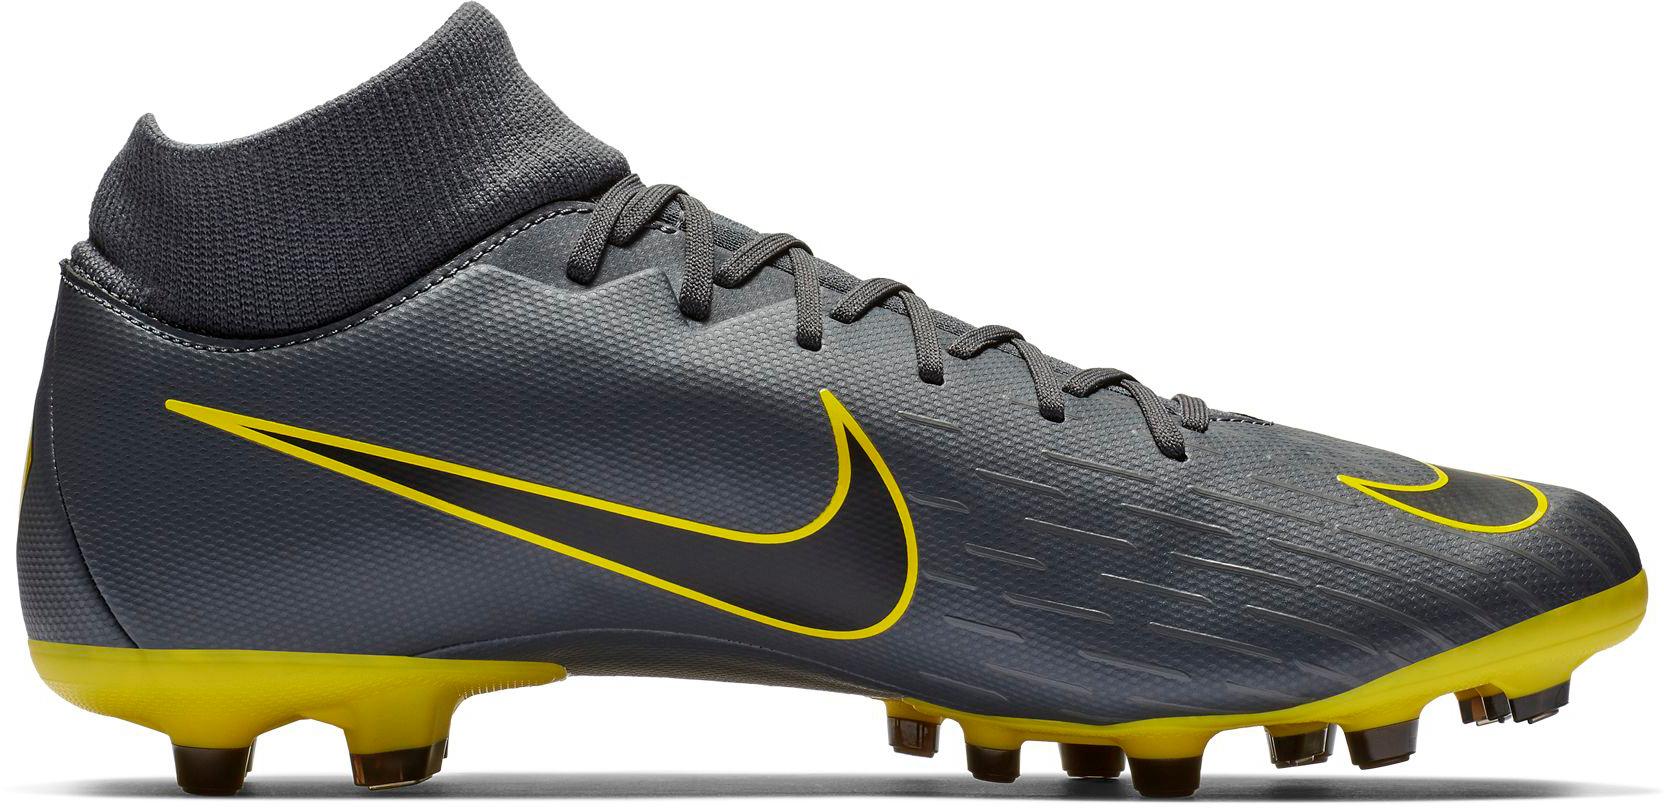 Nike Mercurial Superfly VI Pro FG Soccer Cleat Black Total.